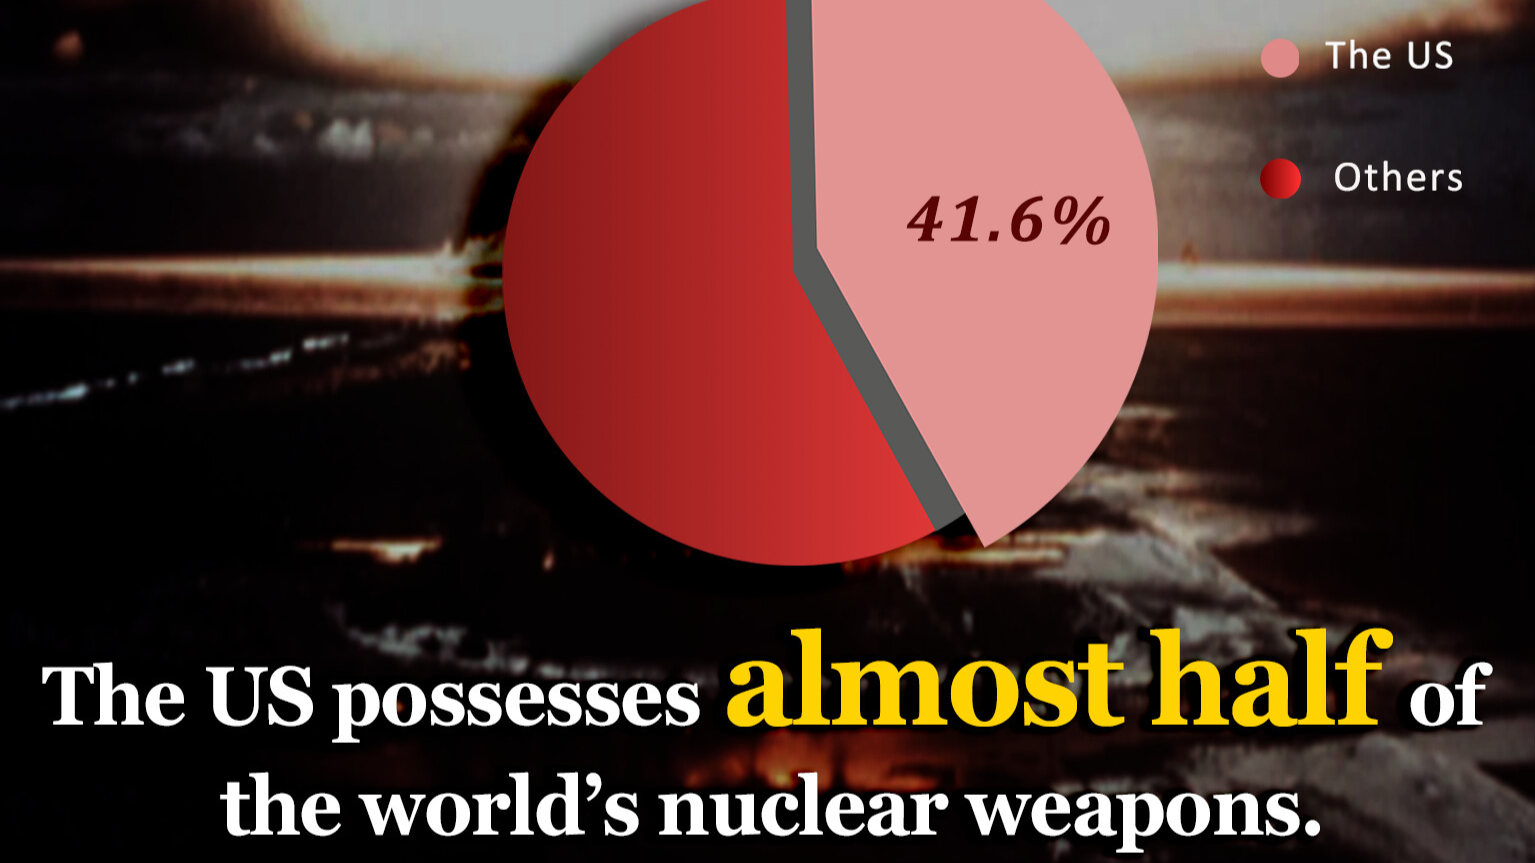 US possesses almost half of world's nuclear weapons